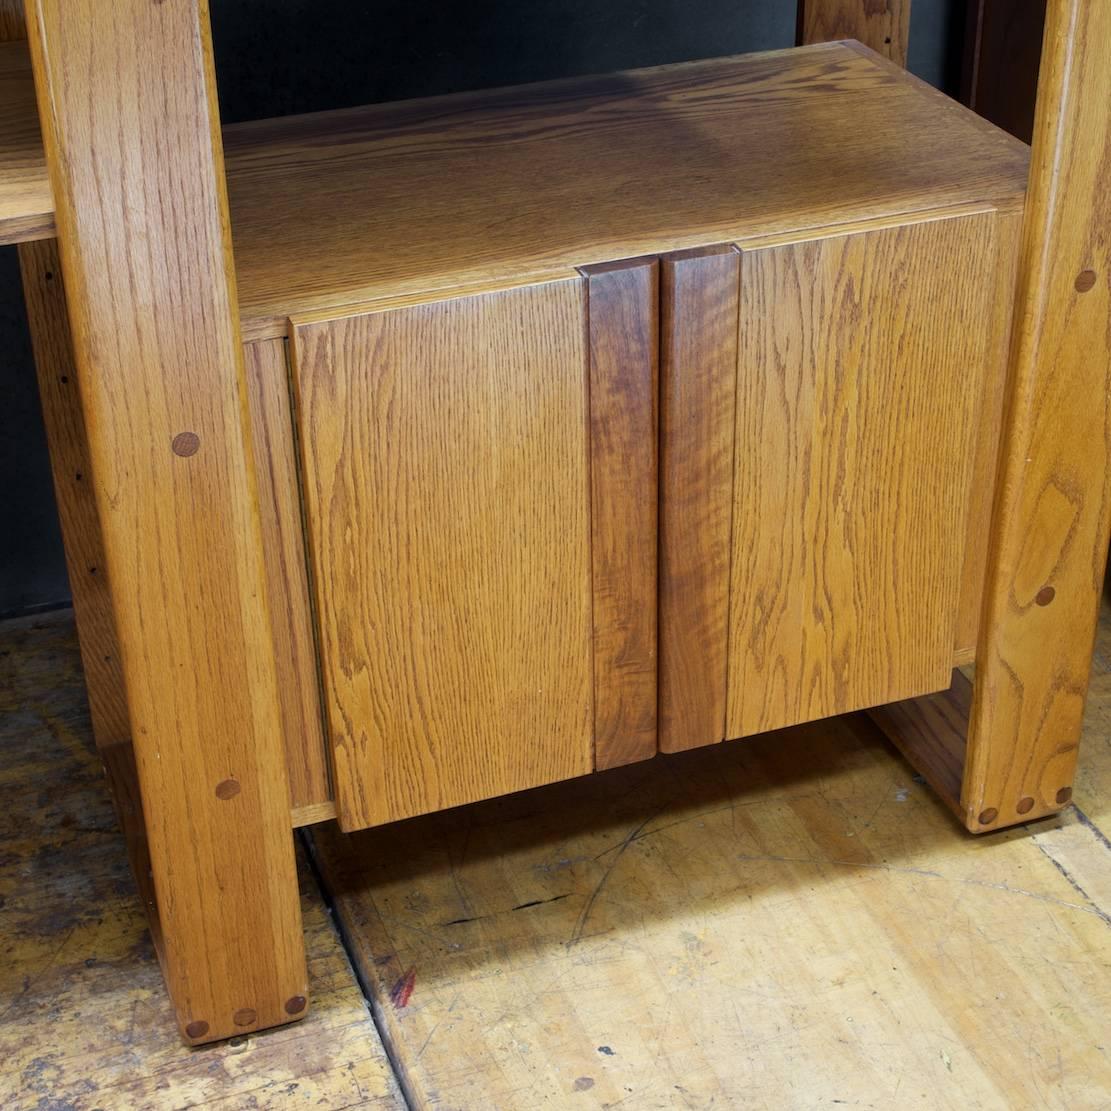 Rare low production California Craft Furniture. A self standing wall unit, shown here in a 3 Bay configuration. The seven shelves can be moved around, or removed and the drop-leaf desk bay and low cabinet bay columns can be used separately.

Hand